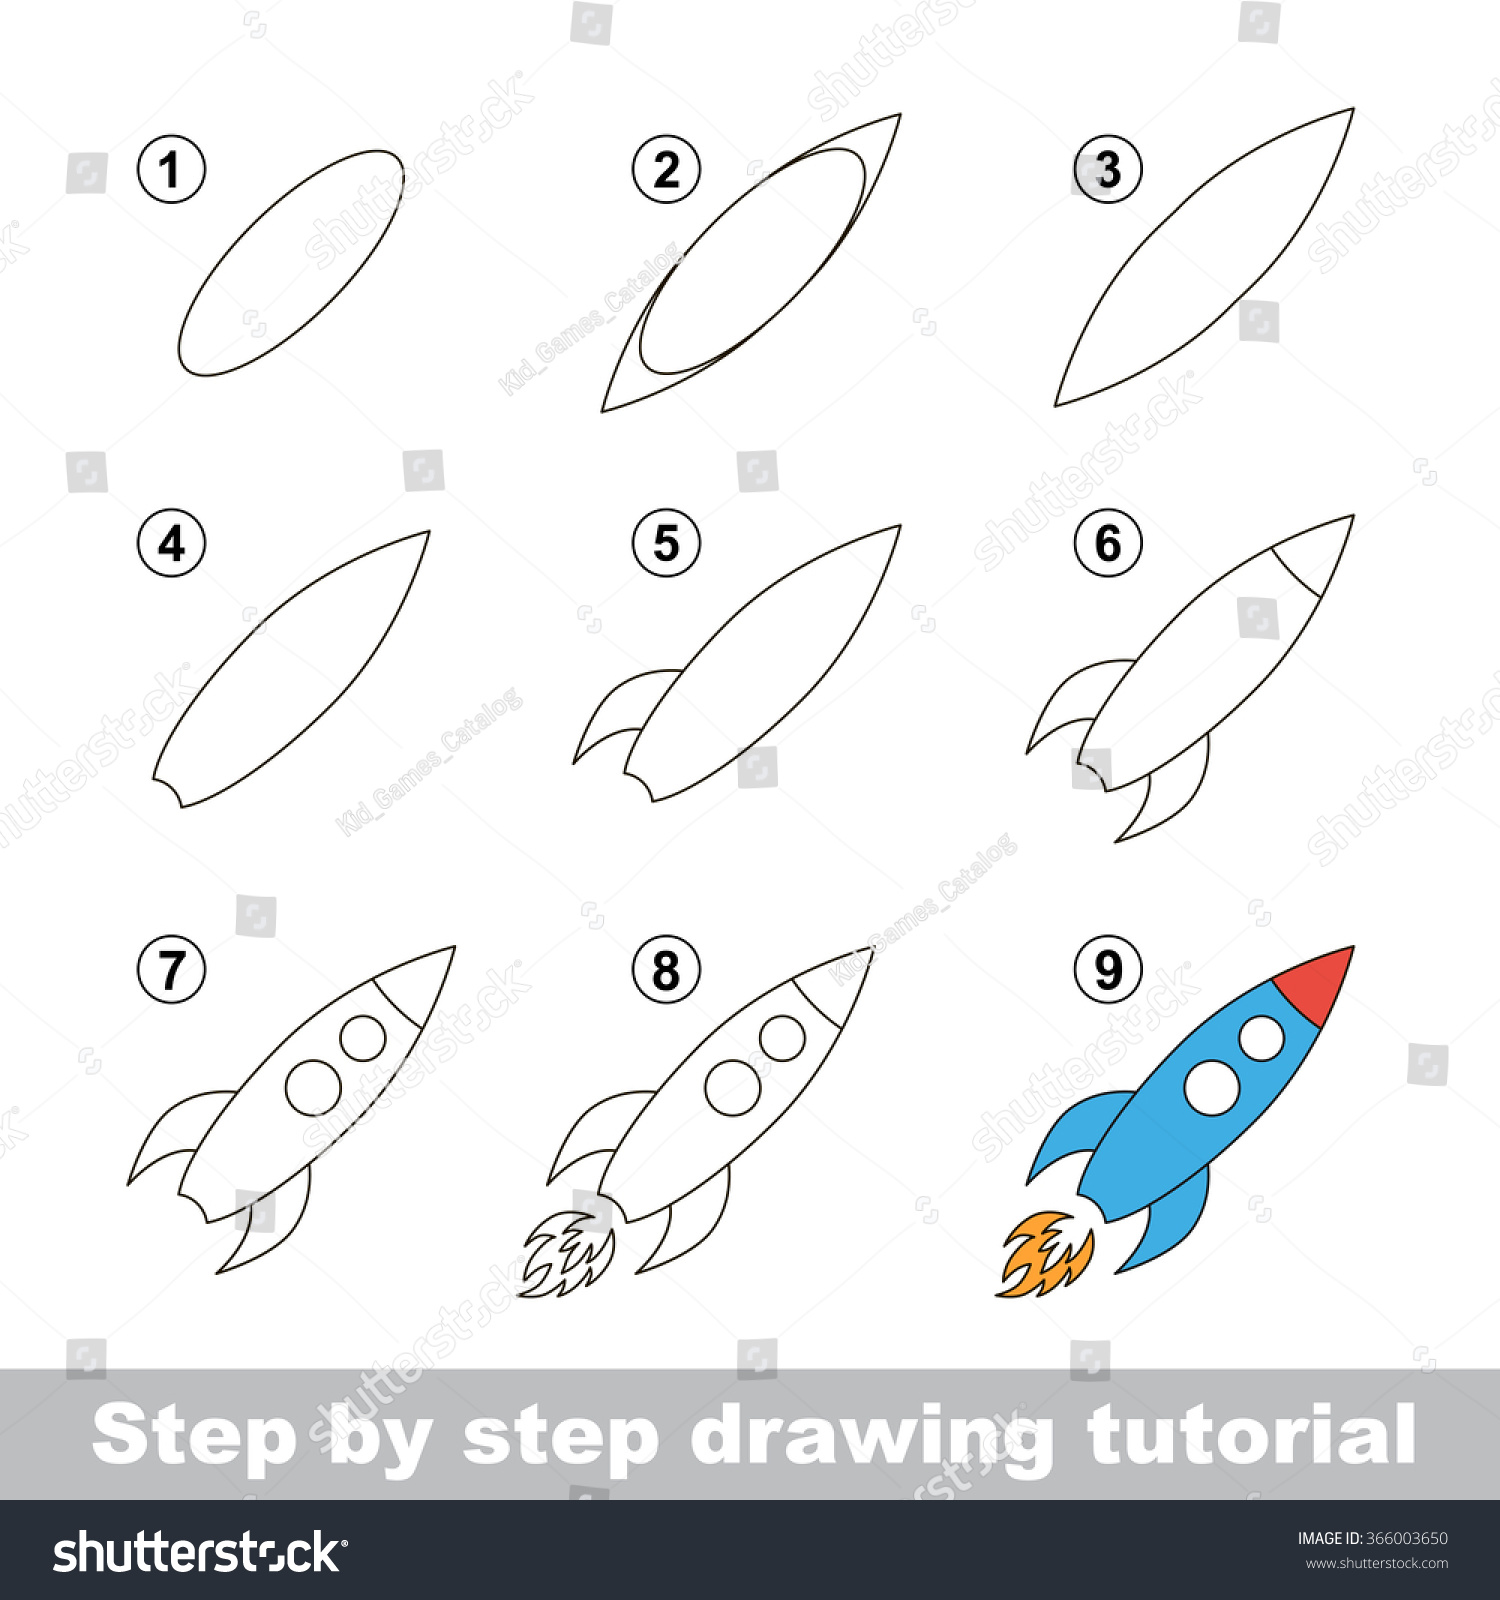 Pin by Brelyn elise on DD&D - Step by Steps | Art drawings for kids